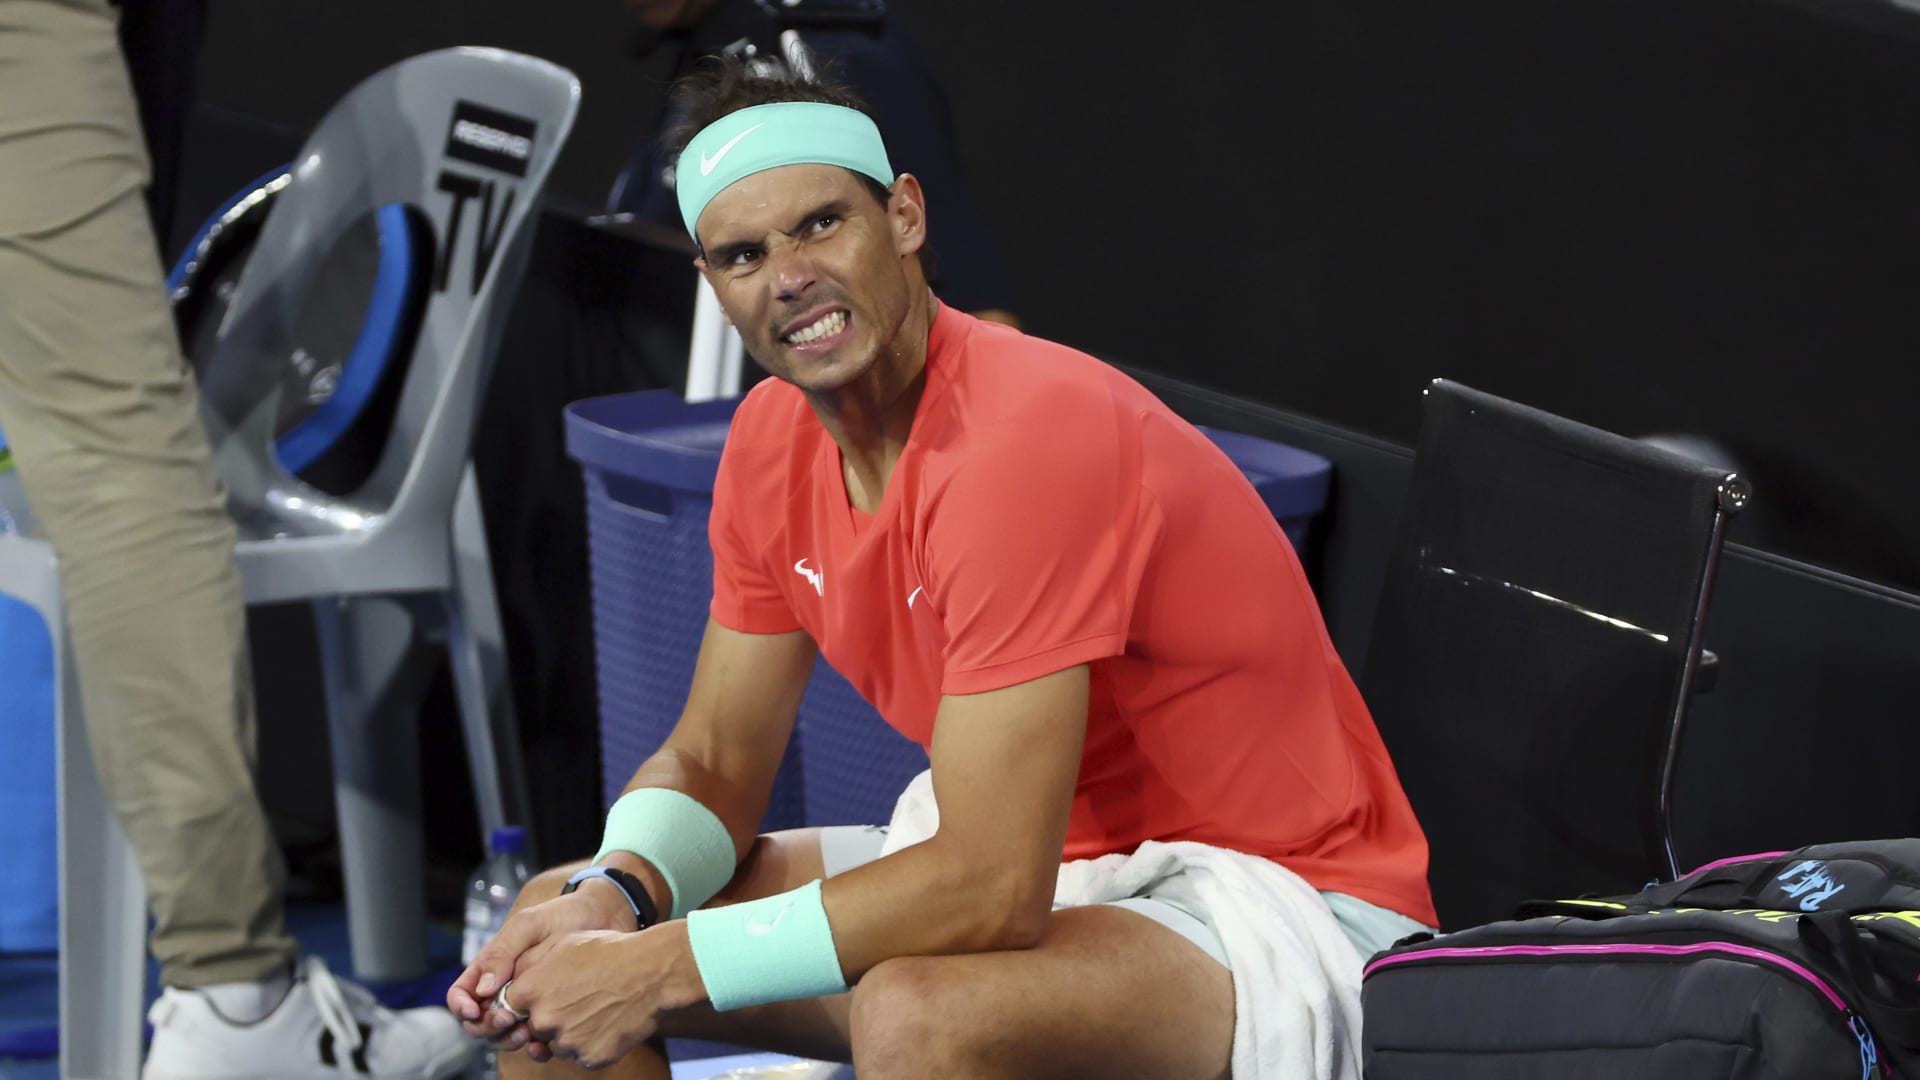 Injured Rafael Nadal out in 2nd round of Australian Open - Los Angeles Times